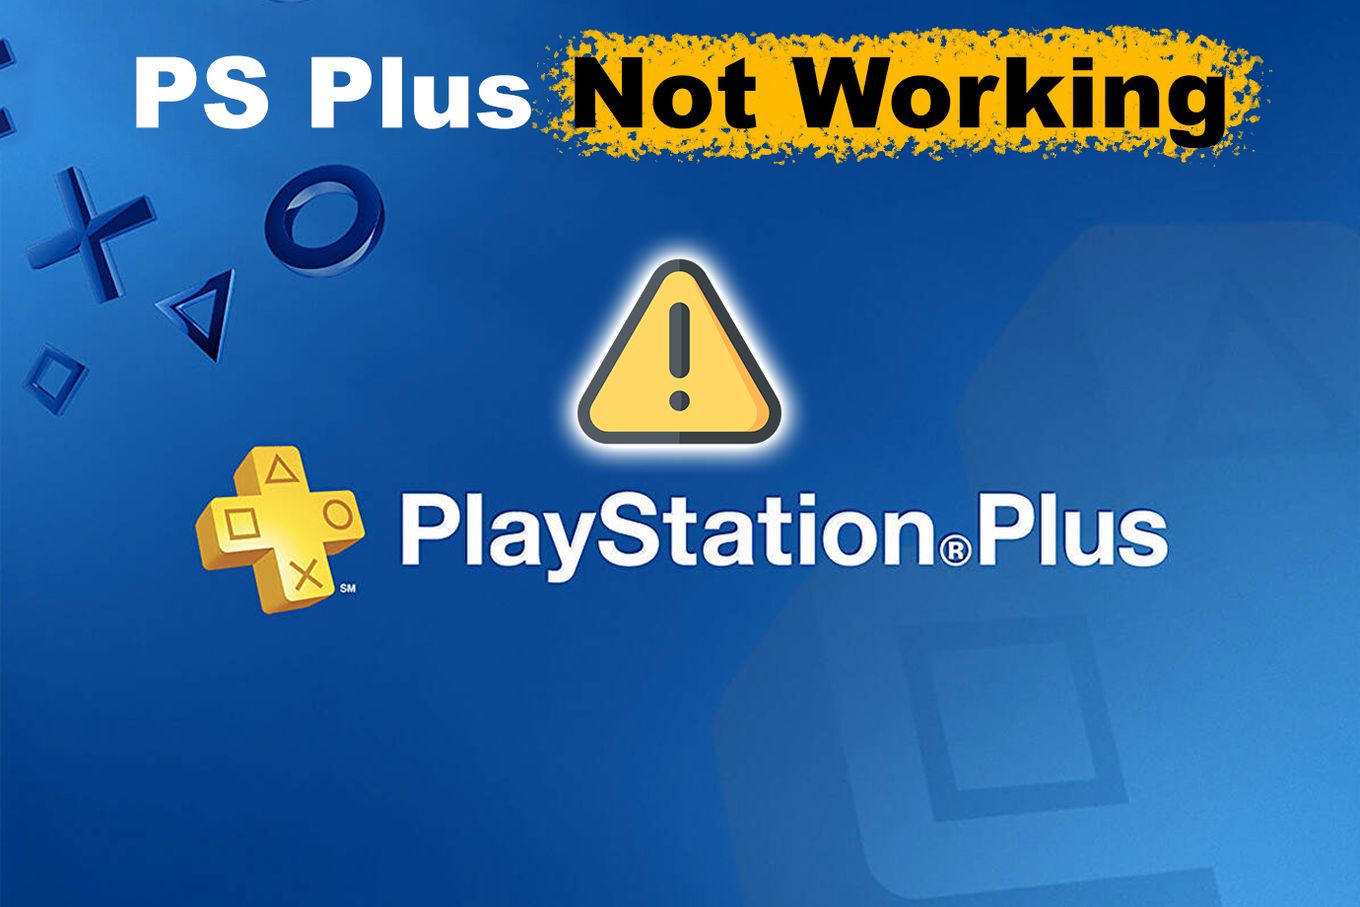 PS Plus Not Working